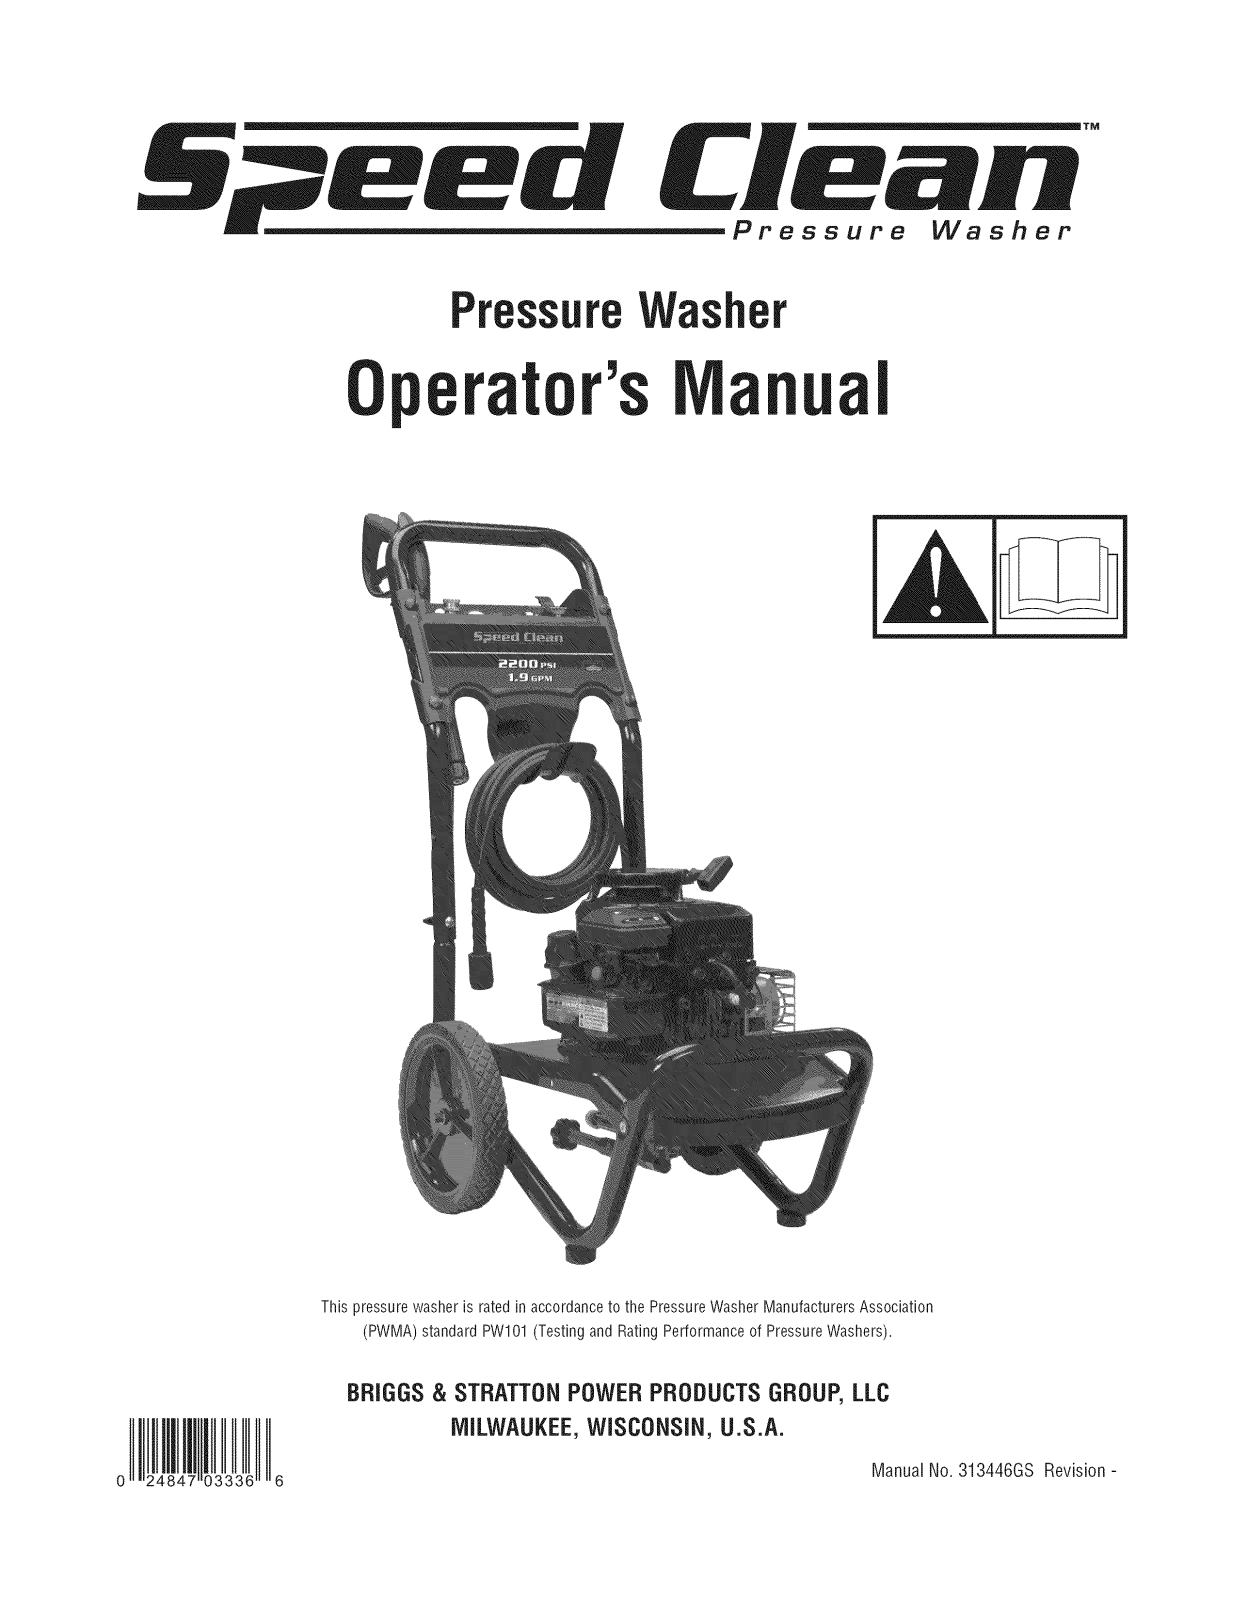 Briggs & Stratton 020460-0 Owner’s Manual